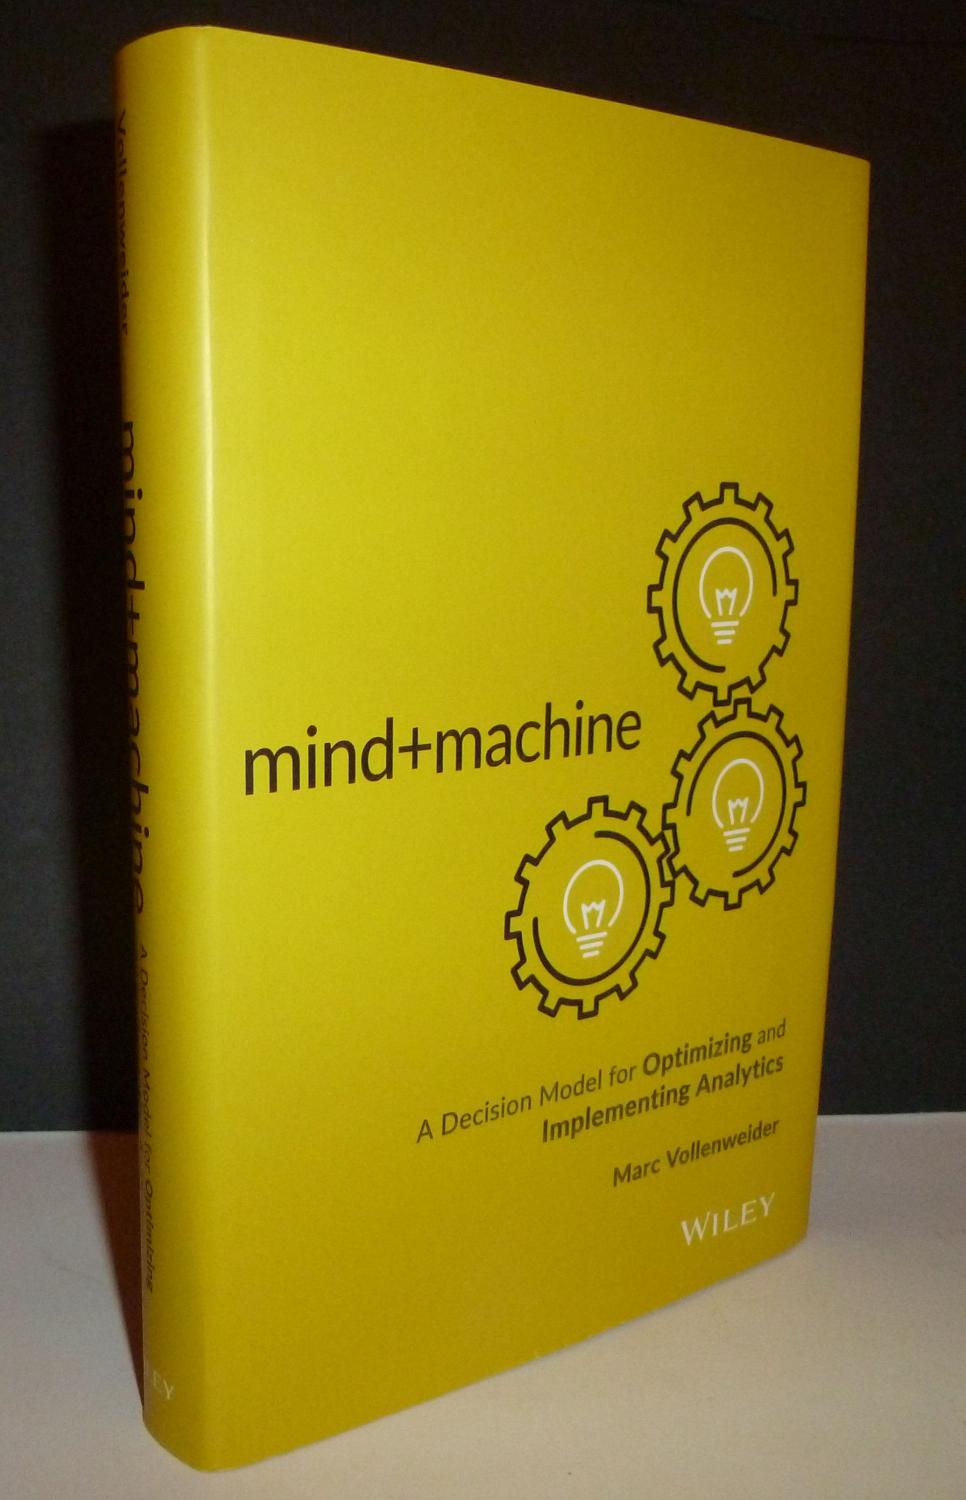 Mind+Machine A Decision Model For Optimizing and Implementing Analytics